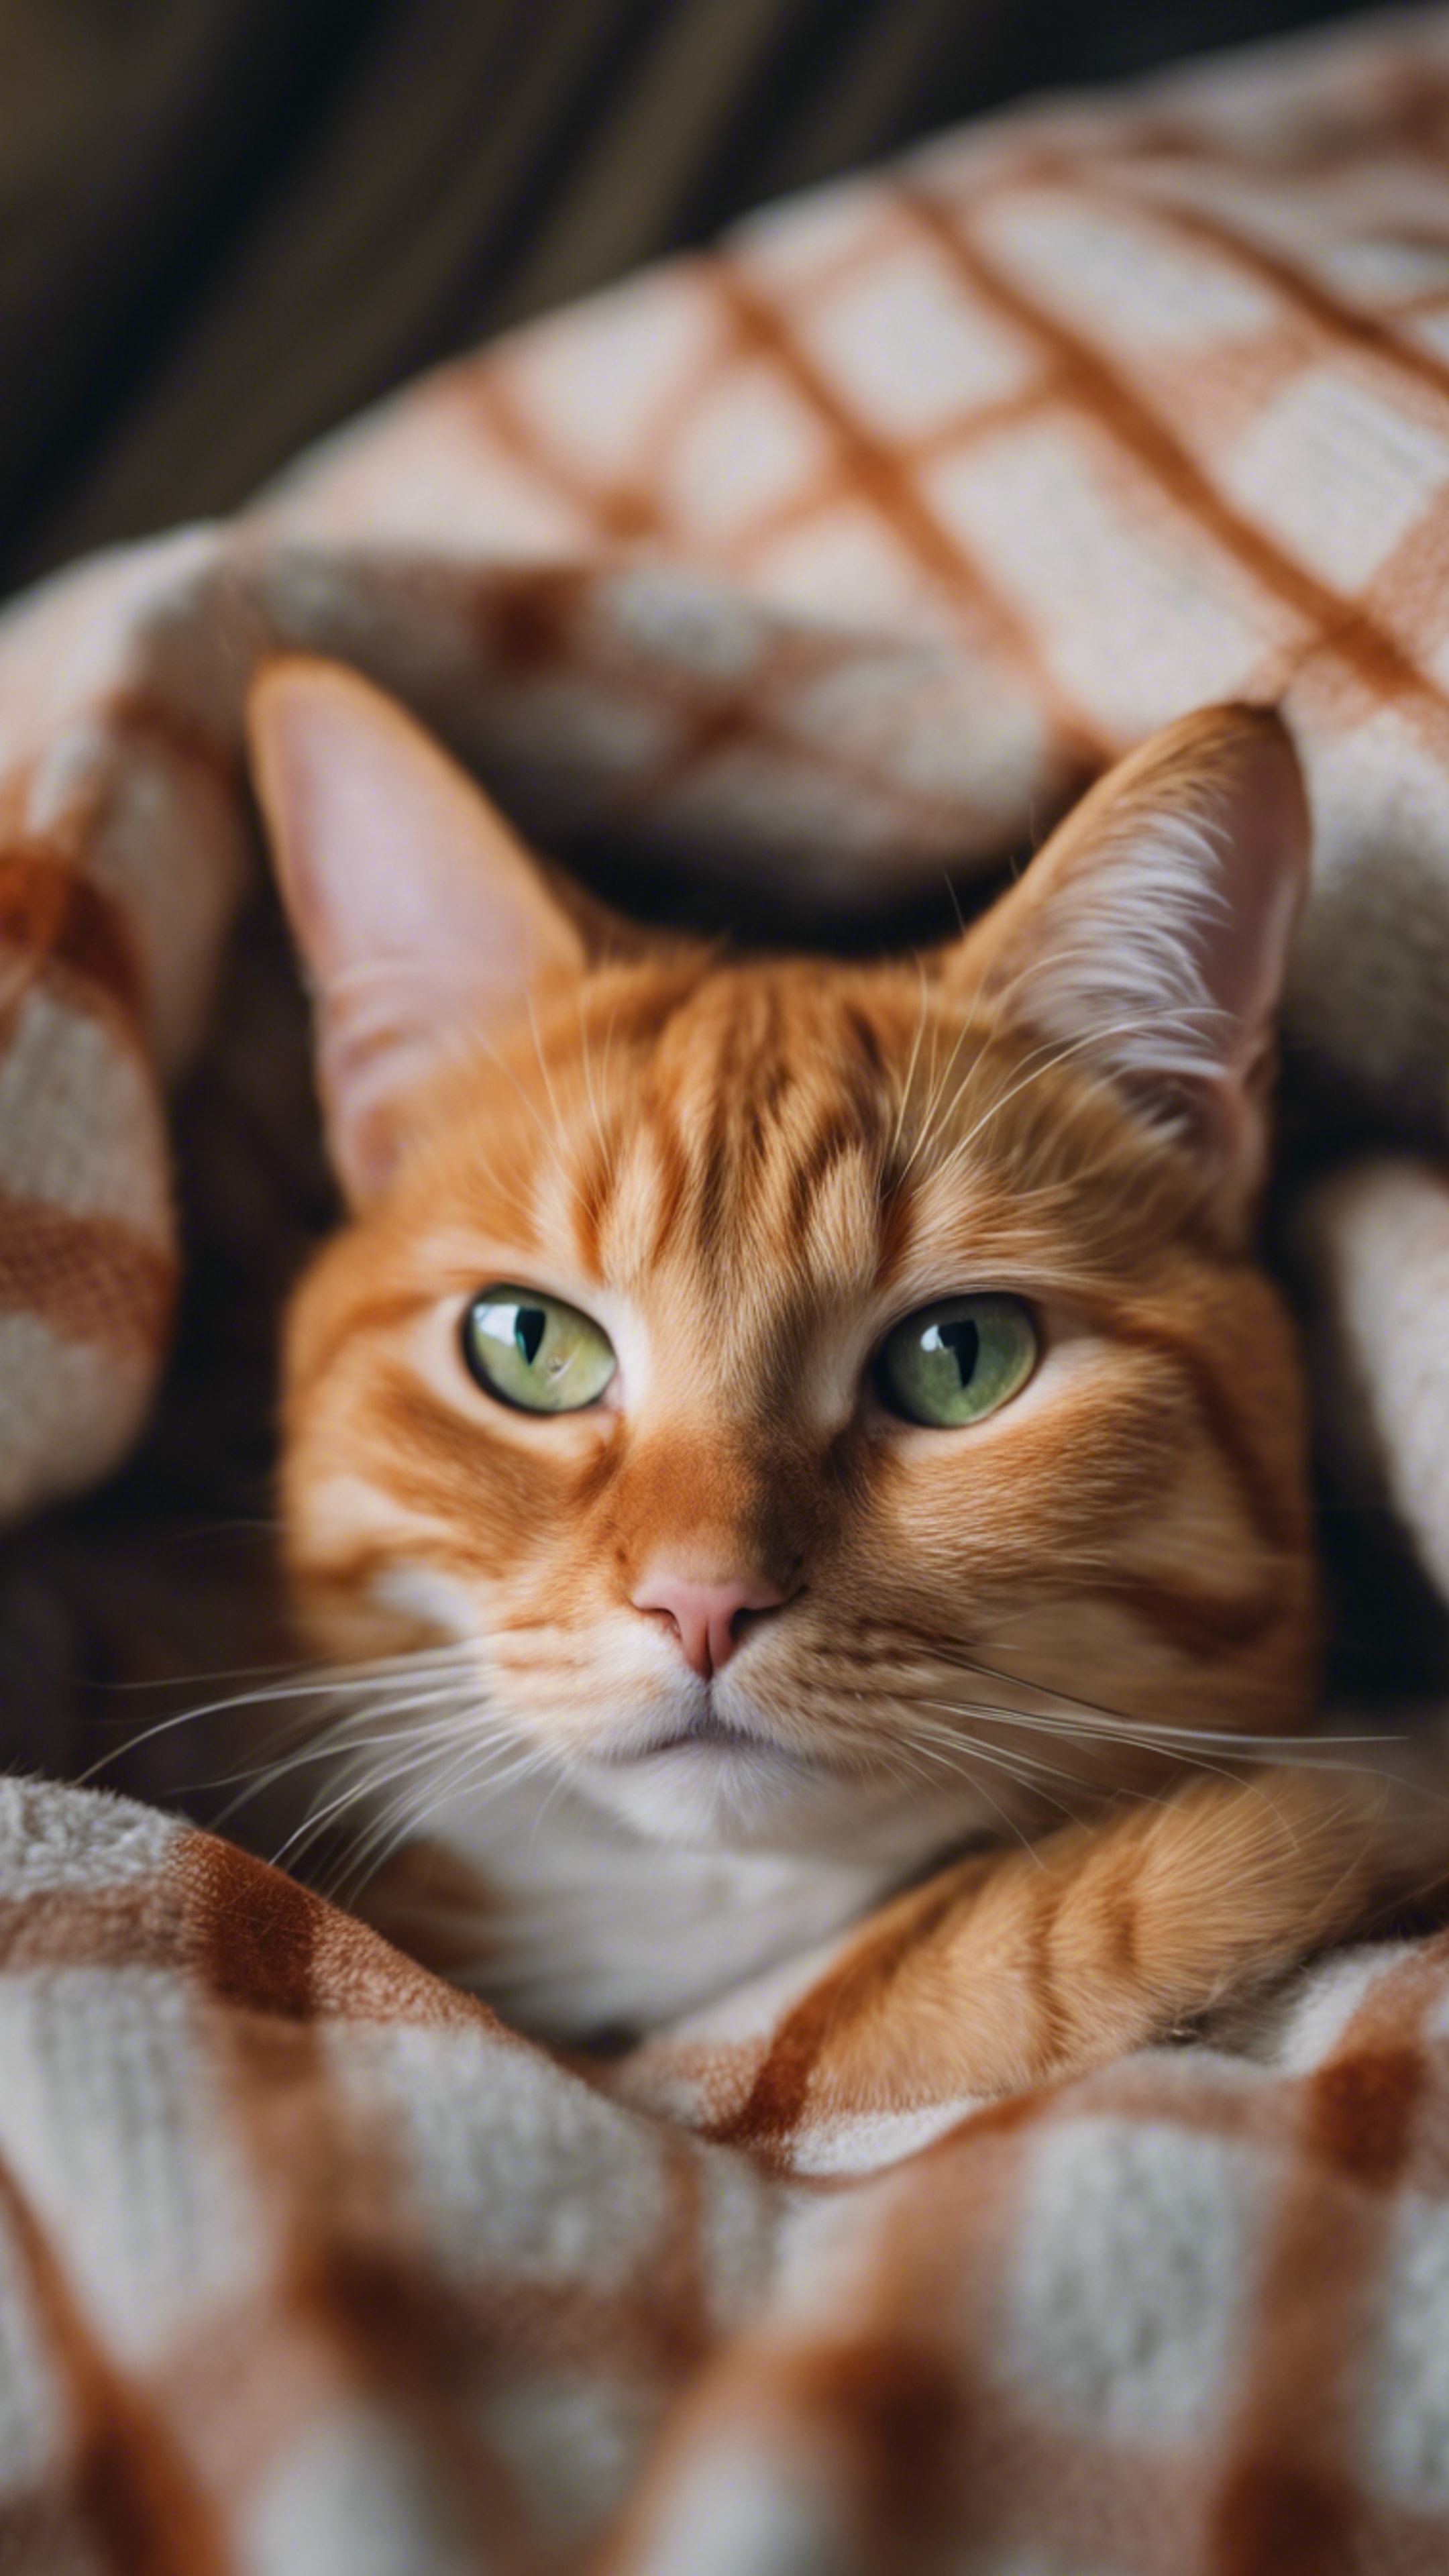 A close up of an orange tabby cat curled up on a cozy plaid blanket, purring gently, with a playful glint in its eyes. کاغذ دیواری[45e4538616504ff6a891]